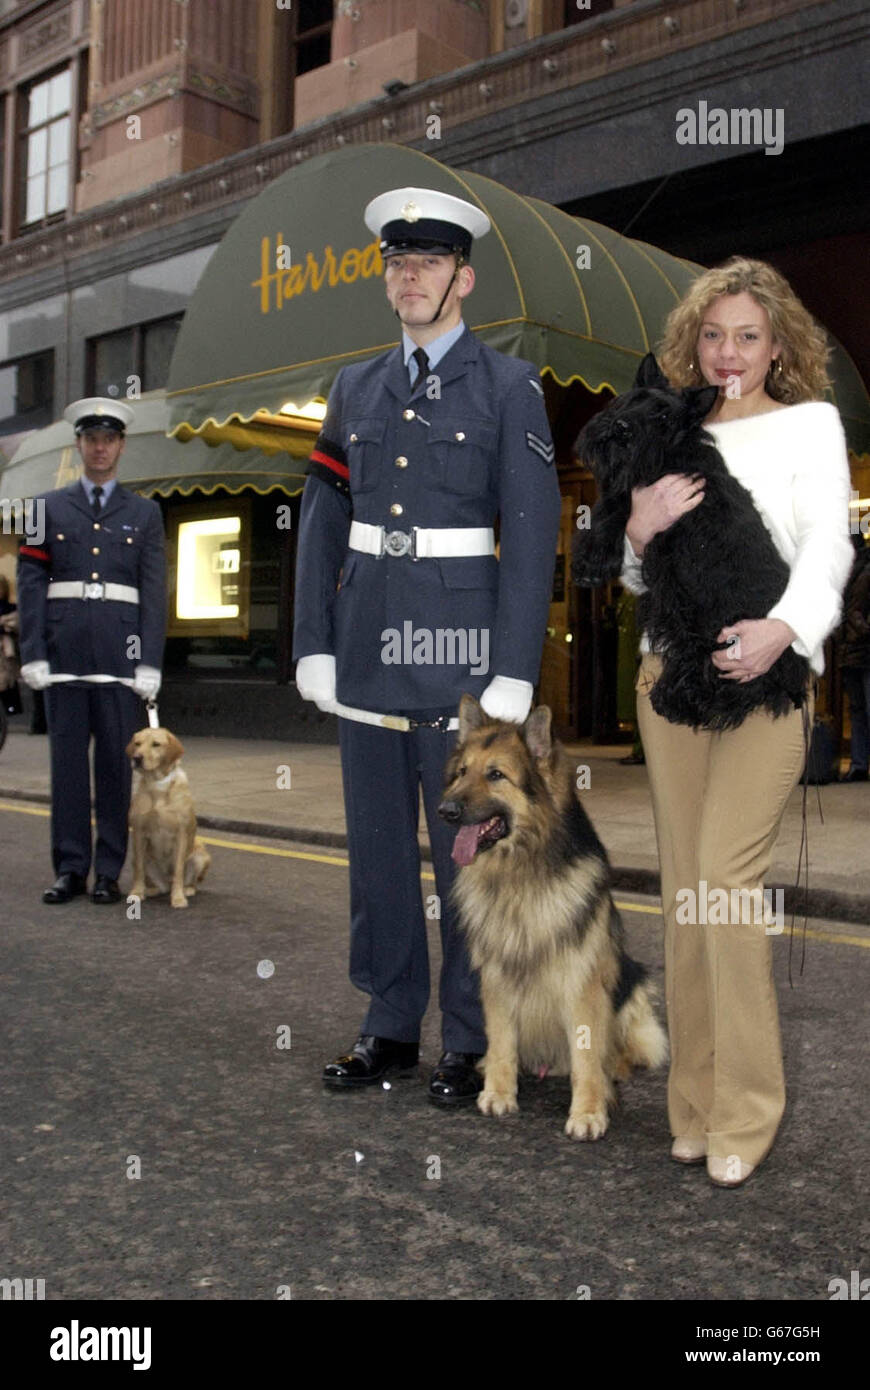 Actress Holly Newman stands outside Harrods in Central London, with Cpl Damien Heartford (centre) and Sgt Paul Bass from the RAF, to help promote an RAF drive to recruit suitable dogs into the Airforce to help protect Airfields and undertake other military activities. Stock Photo